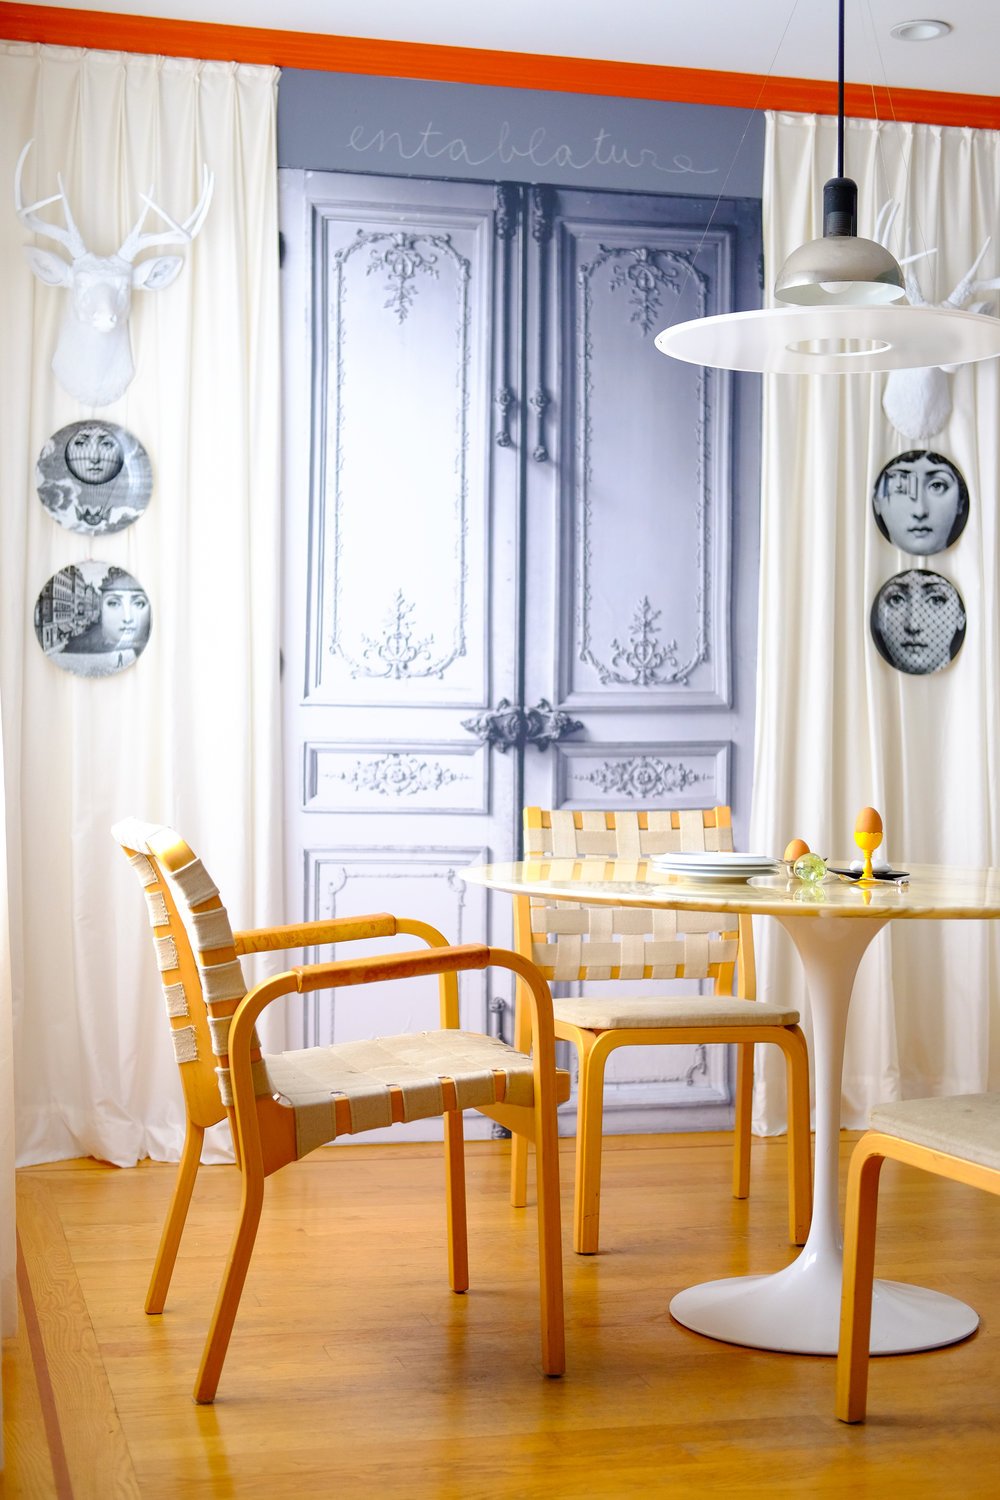 A dining area with a round white table, light wooden chairs, and a pendant light. The backdrop features ornate double doors, accented by plates and deer head wall decor.